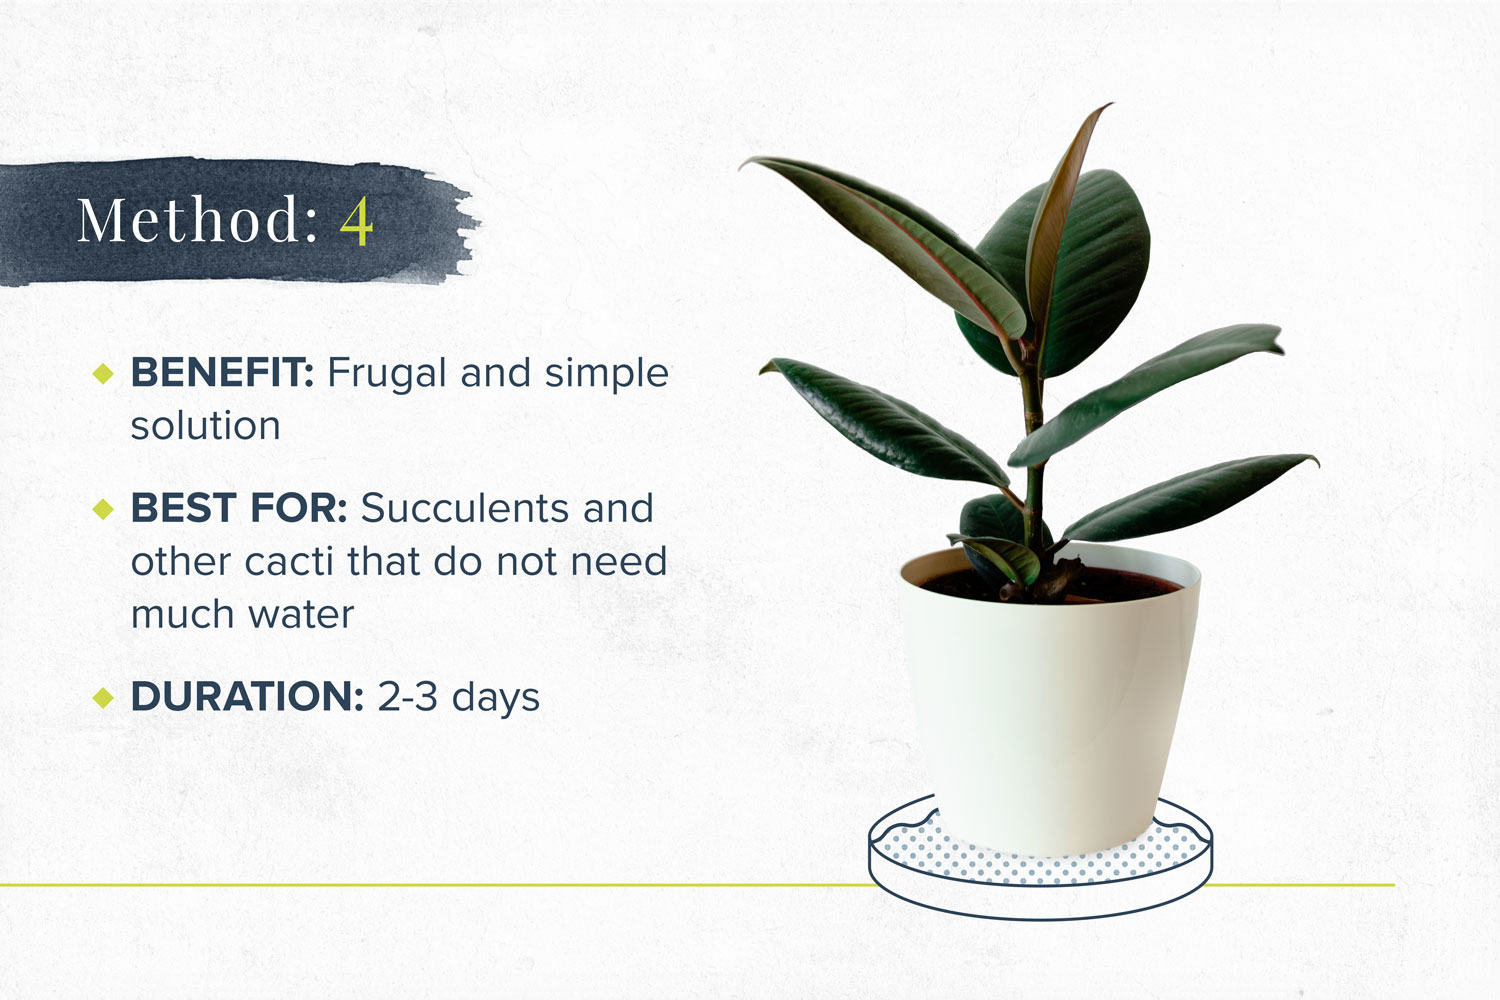 Benefits: Frugal and simple solution Best for: Succulents and other cacti that do not need much water Duration: 2-3 days